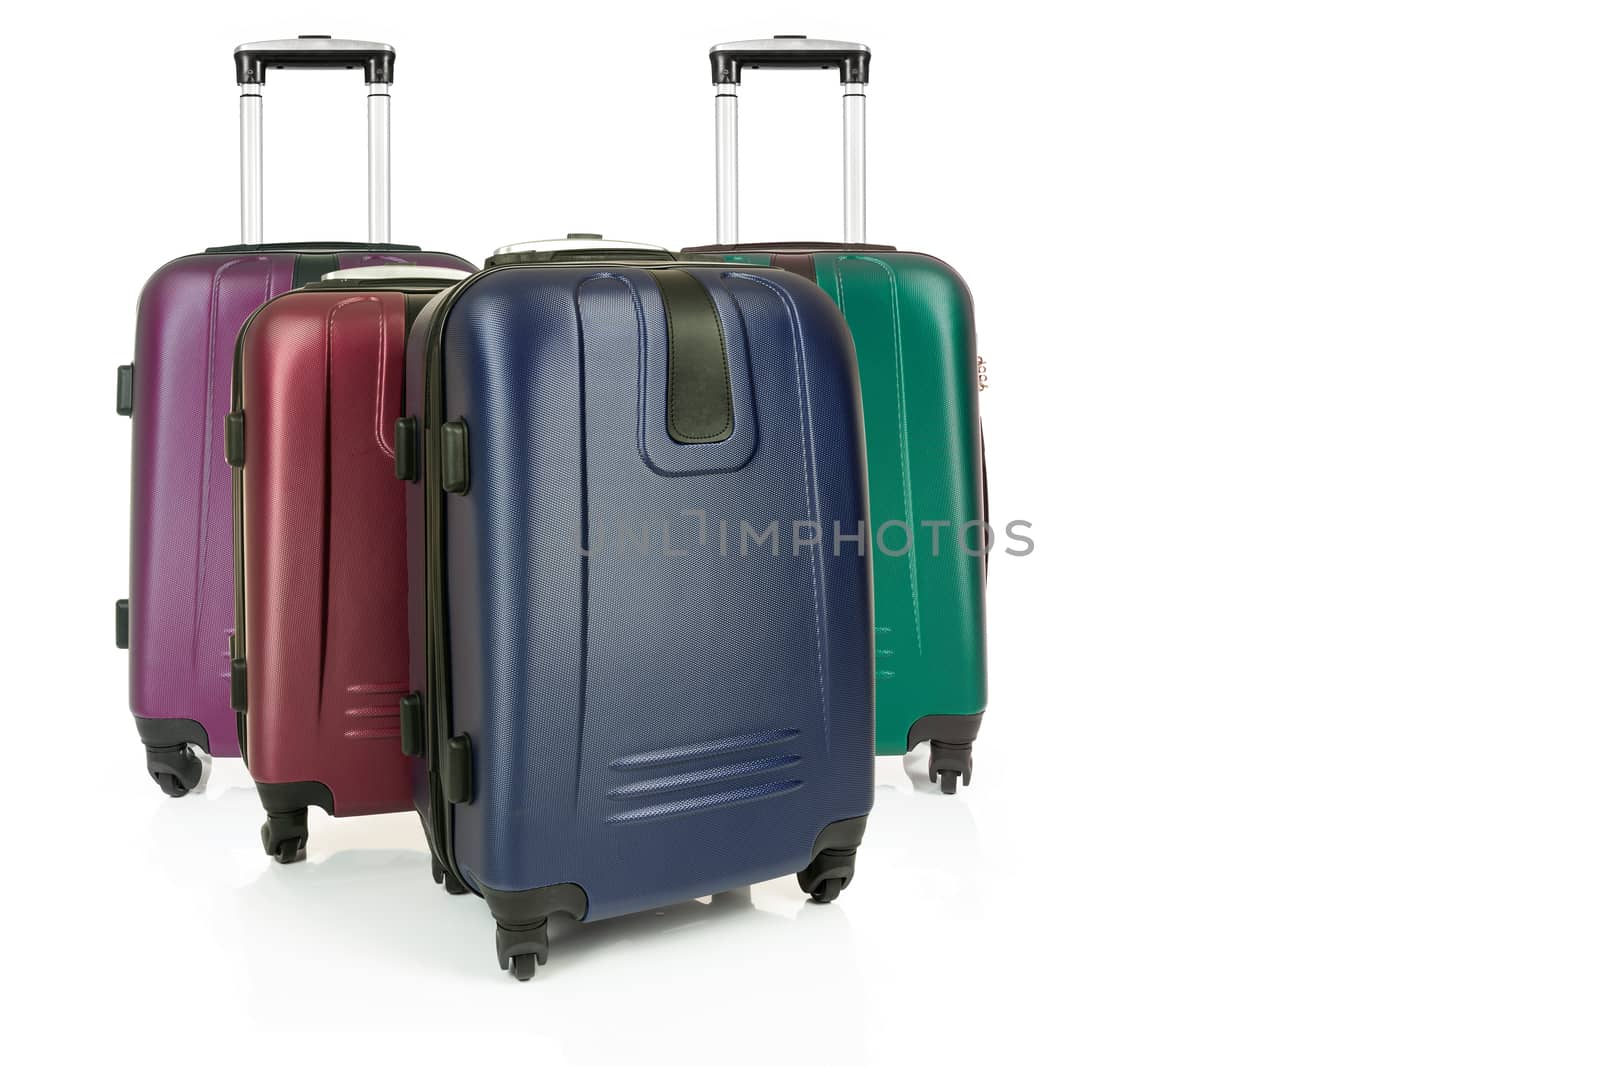 Mix of travel luggage by wdnet_studio